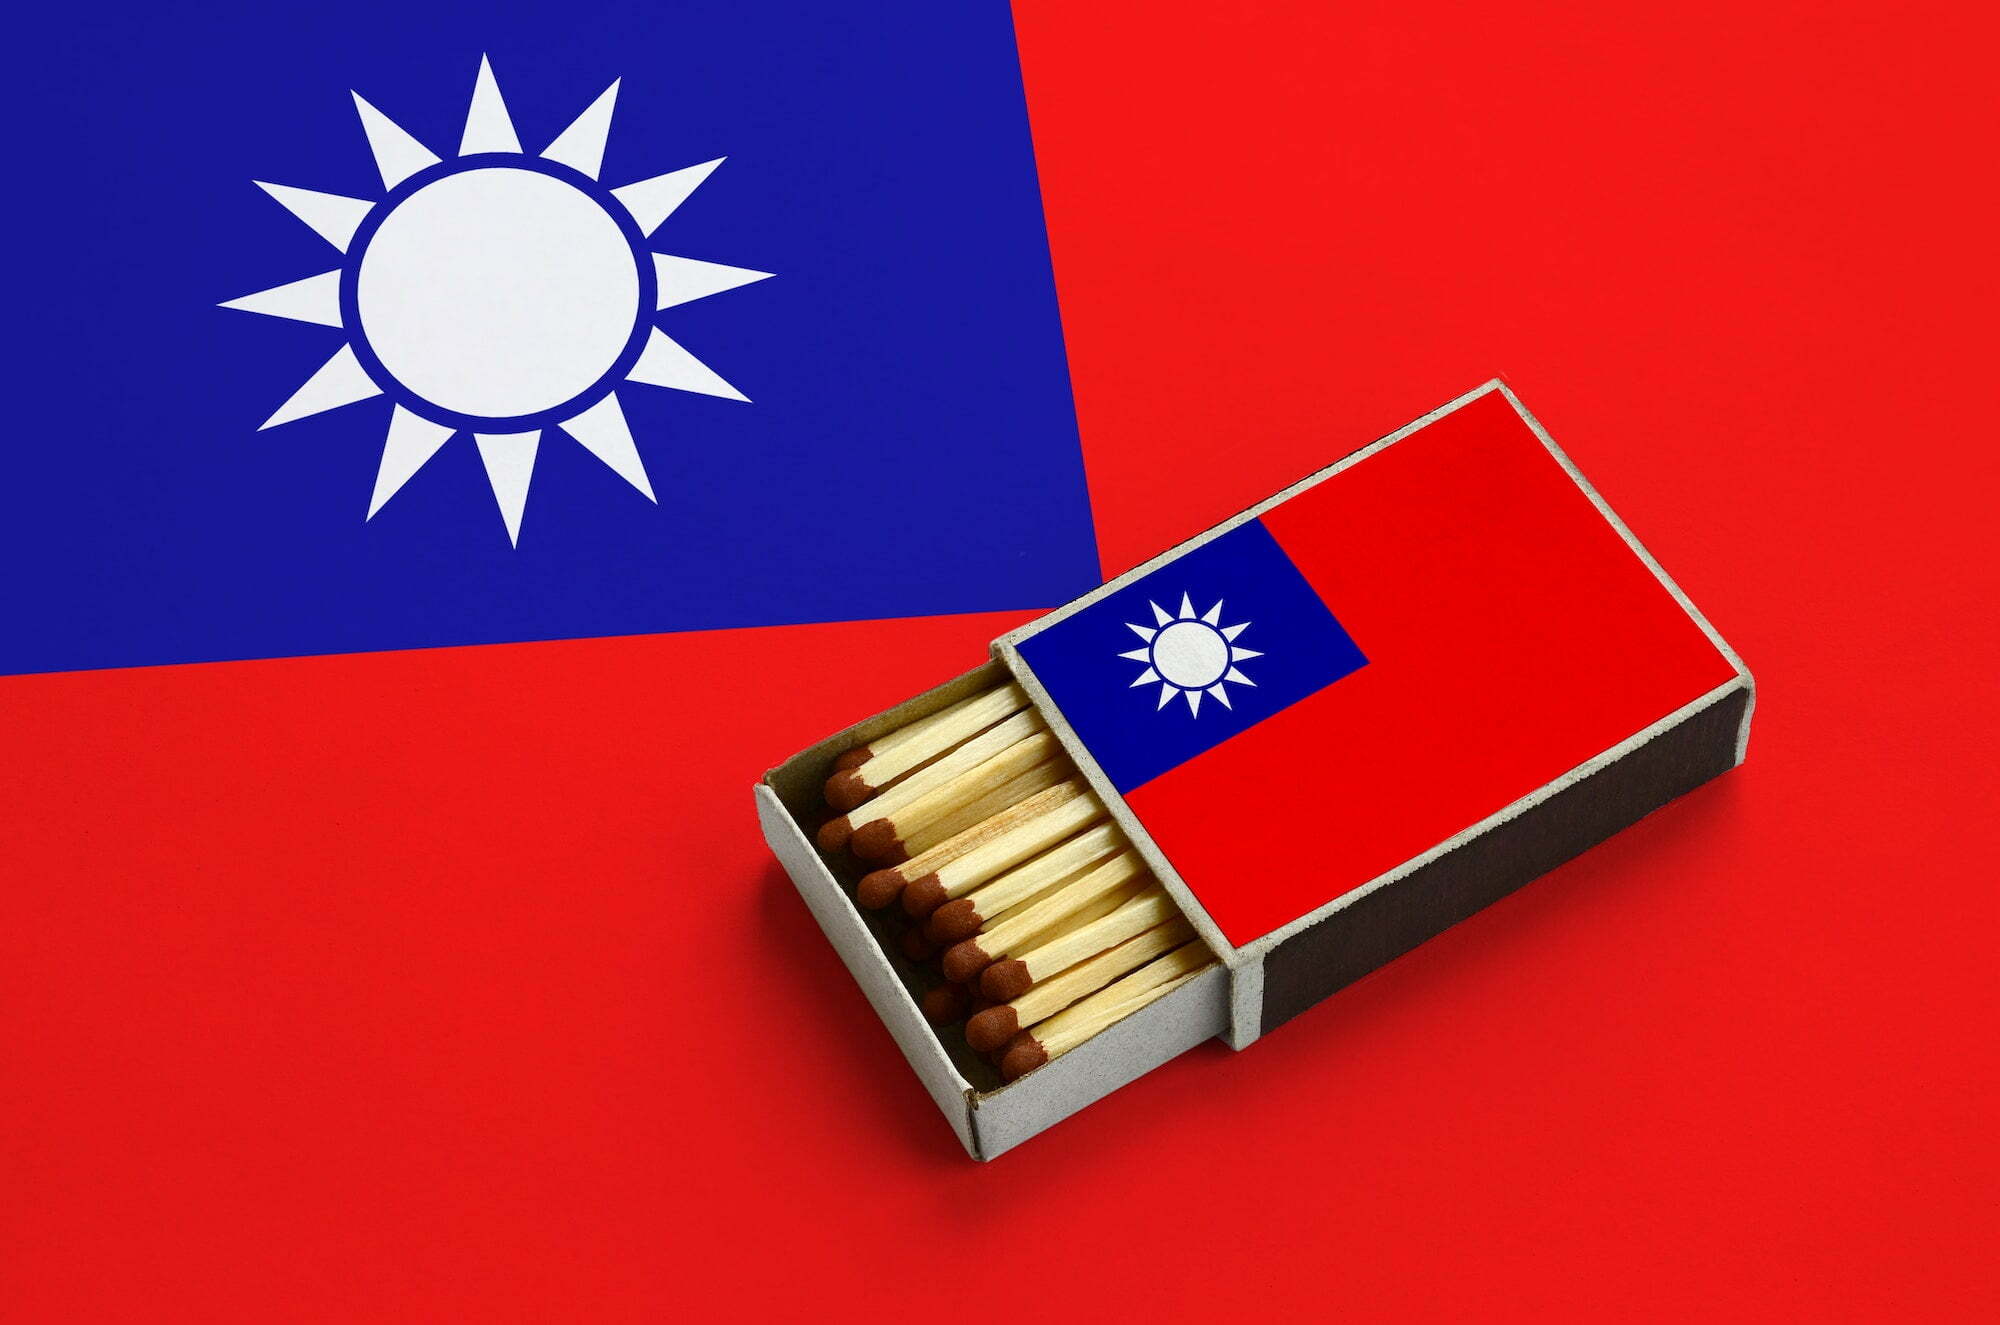 Taiwan flag is shown in an open matchbox, which is filled with matches and lies on a large flag.